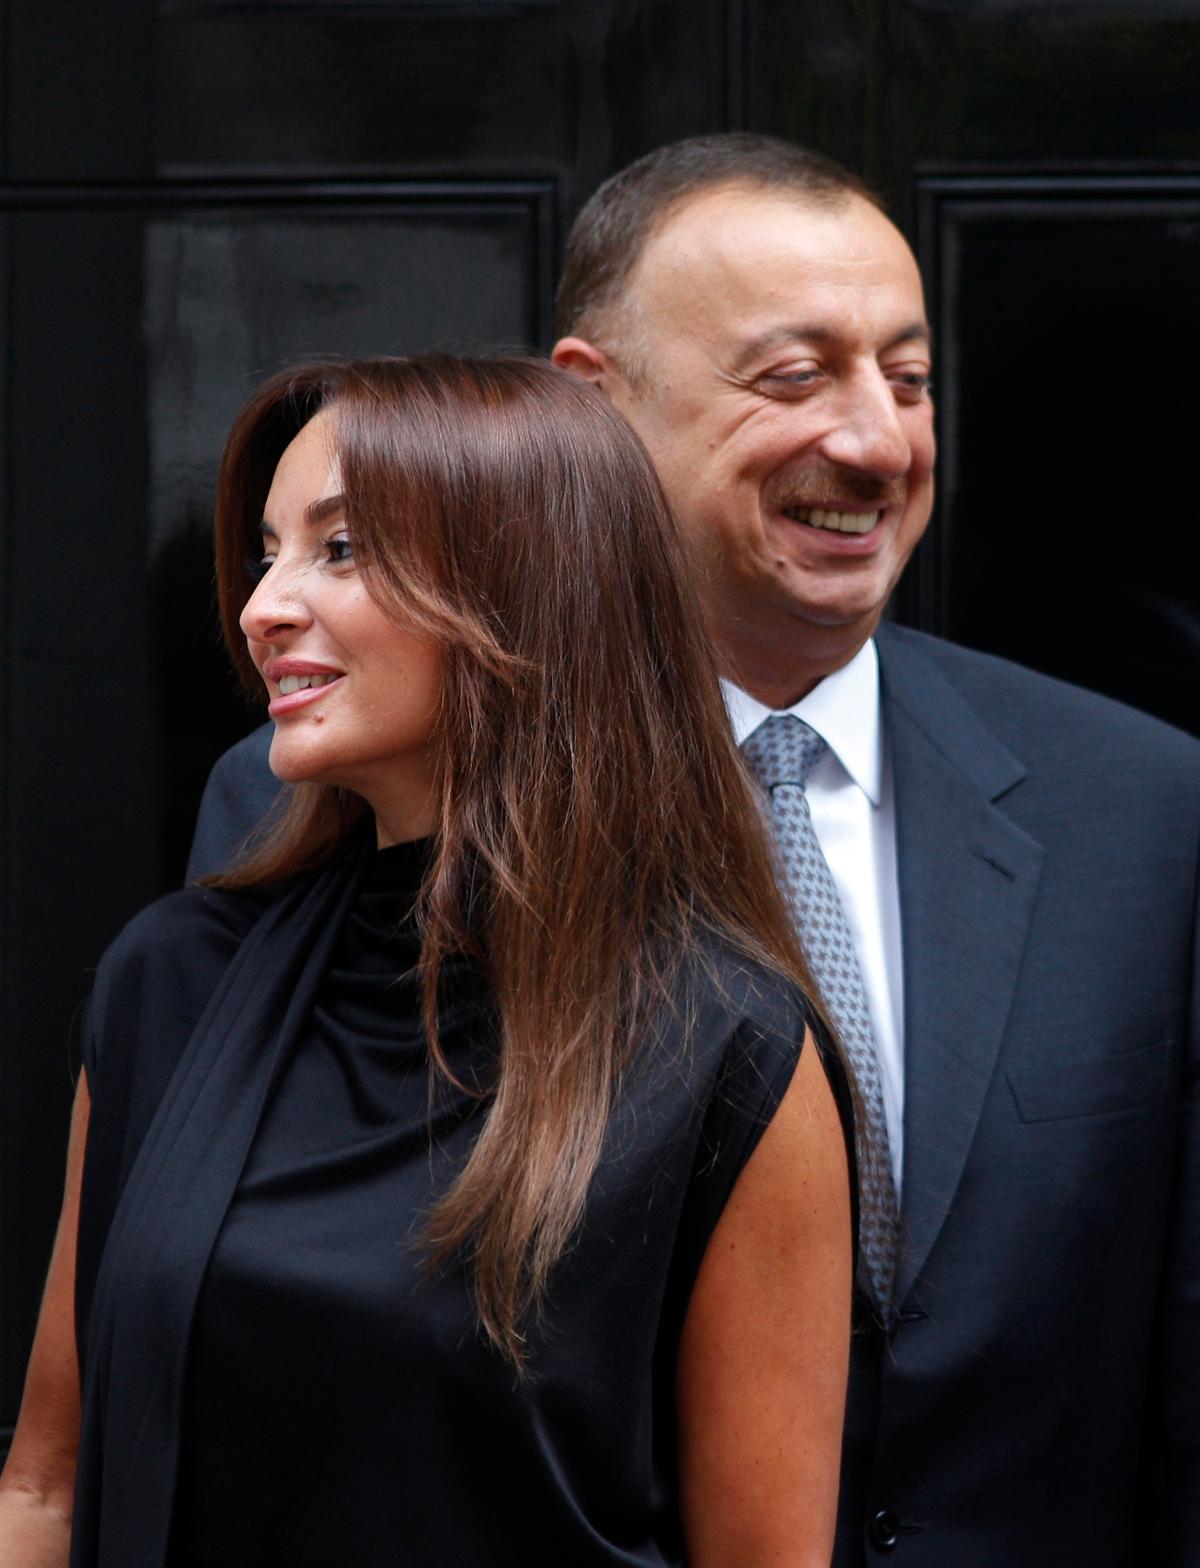 Azerbaijan's President Ilham Aliyev and his wife Mehriban Aliyeva outside the official residence at 10 Downing Street in central London on July 13, 2009. (AP Photo/Lefteris Pitarakis)